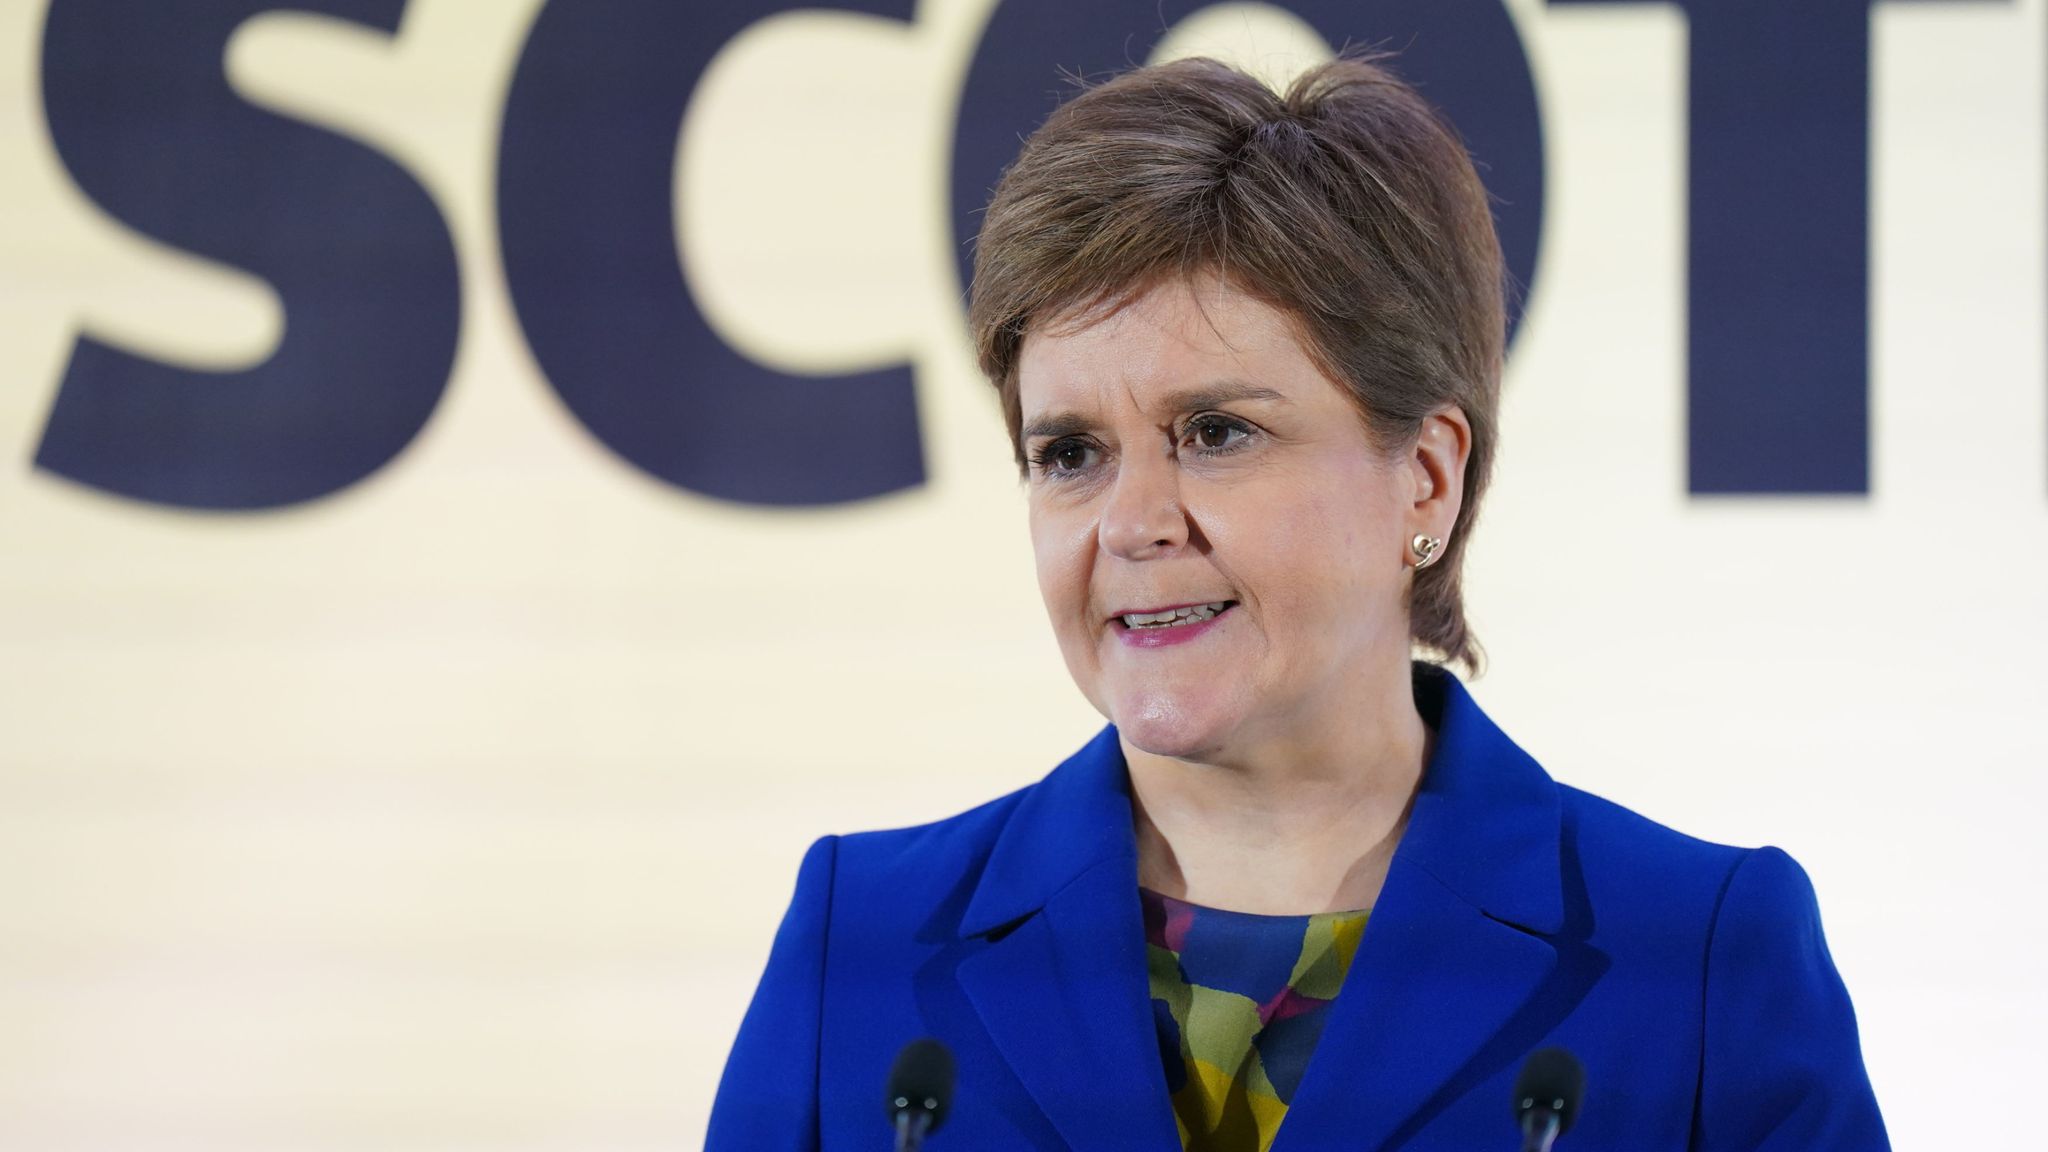 Nicola Sturgeon will not be suspended by SNP amid police investigation